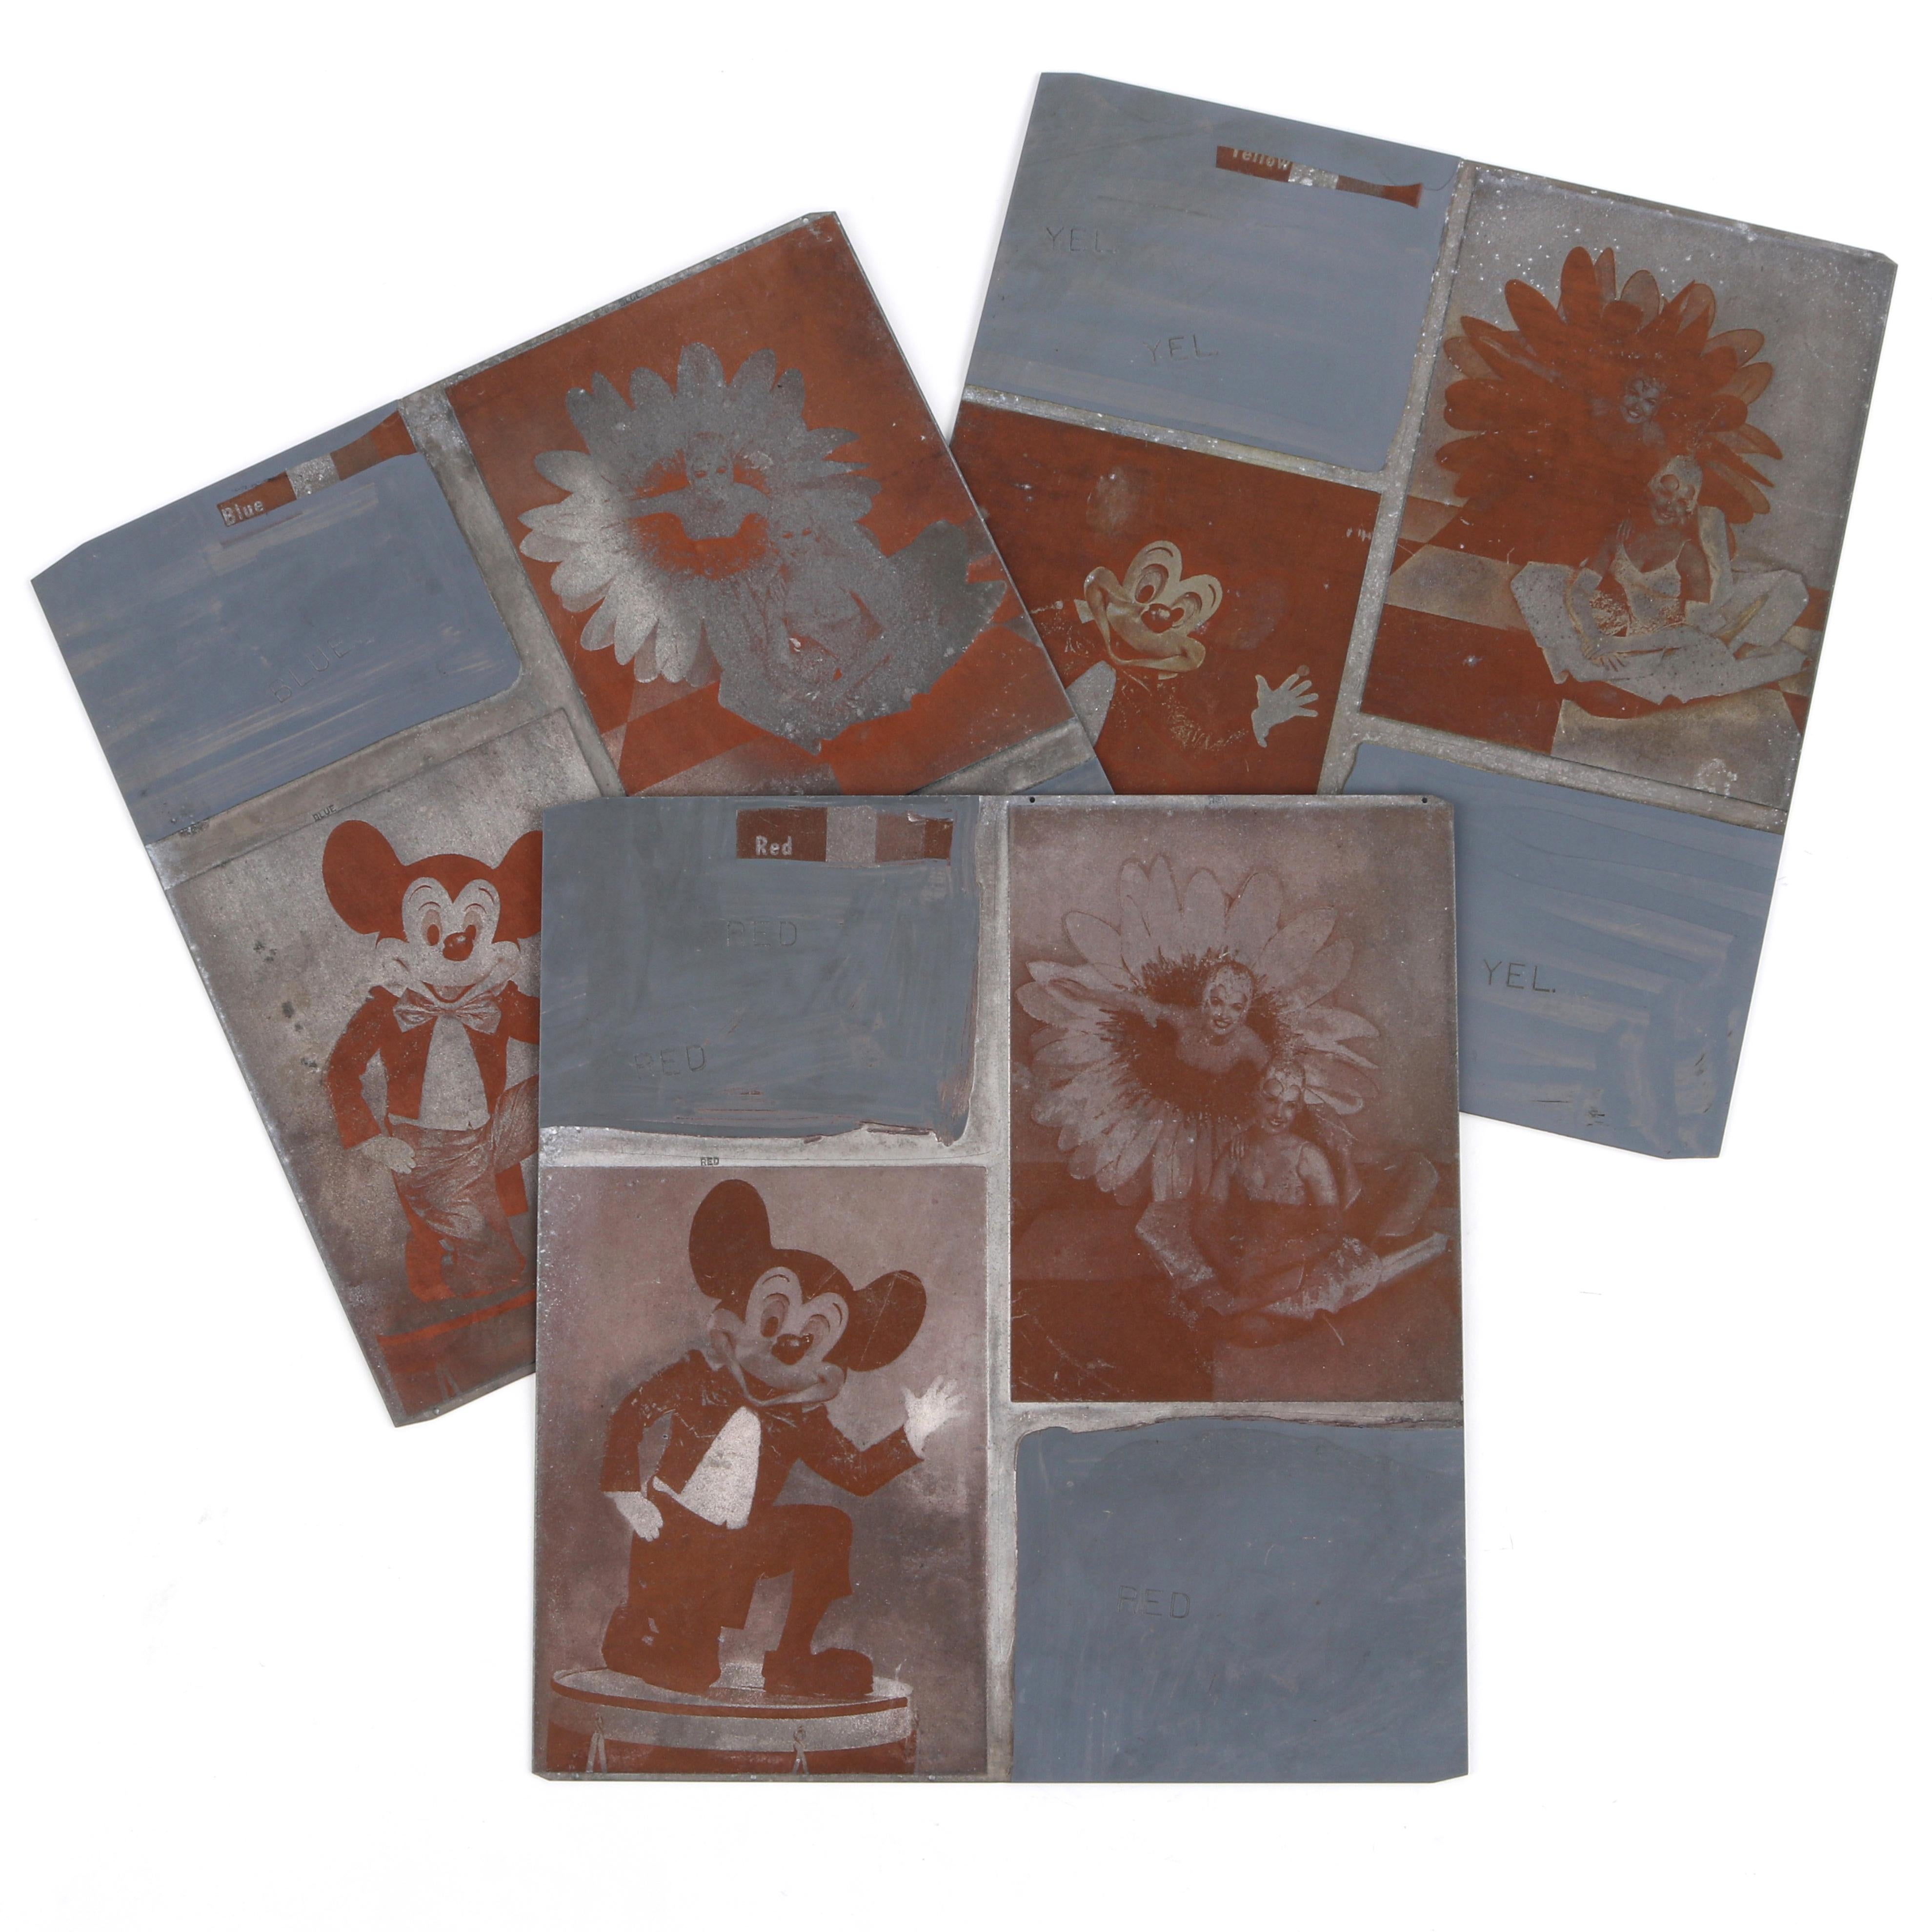 Set of 3 vintage Mickey Mouse & Disney themed halftone magnesium engraving plates for printing. Engraving is an intaglio printmaking process in which lines or dots are cut into a metal plate in order to hold the ink. Ink is then packed into this and